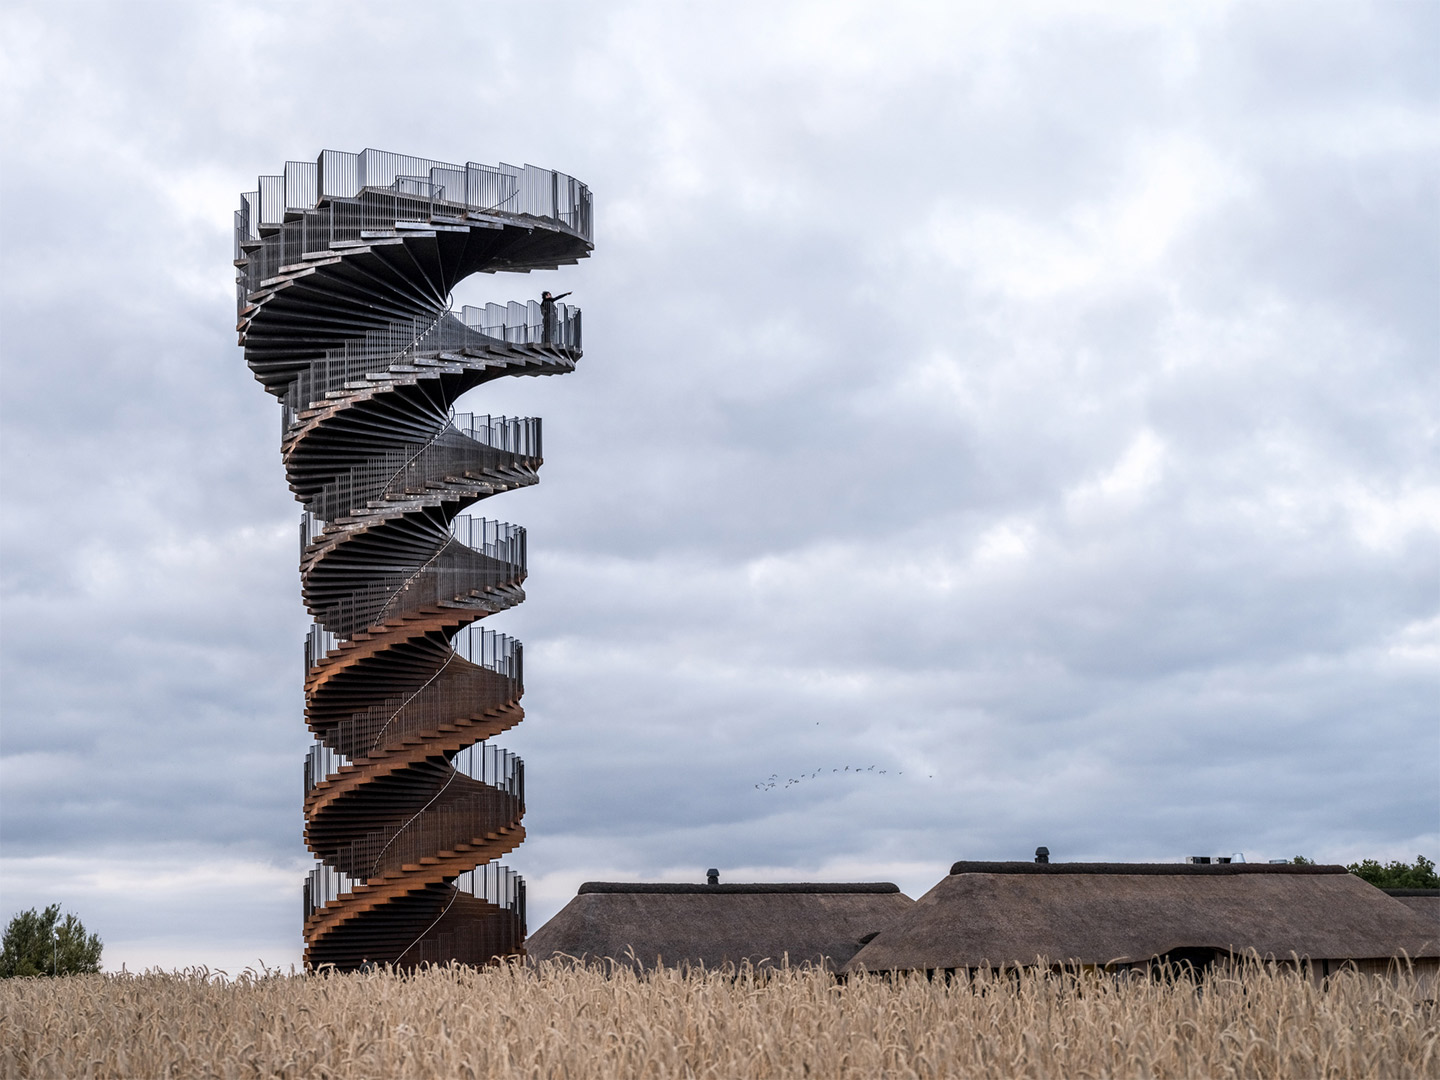 Marsk Tower in Denmark by BIG architects